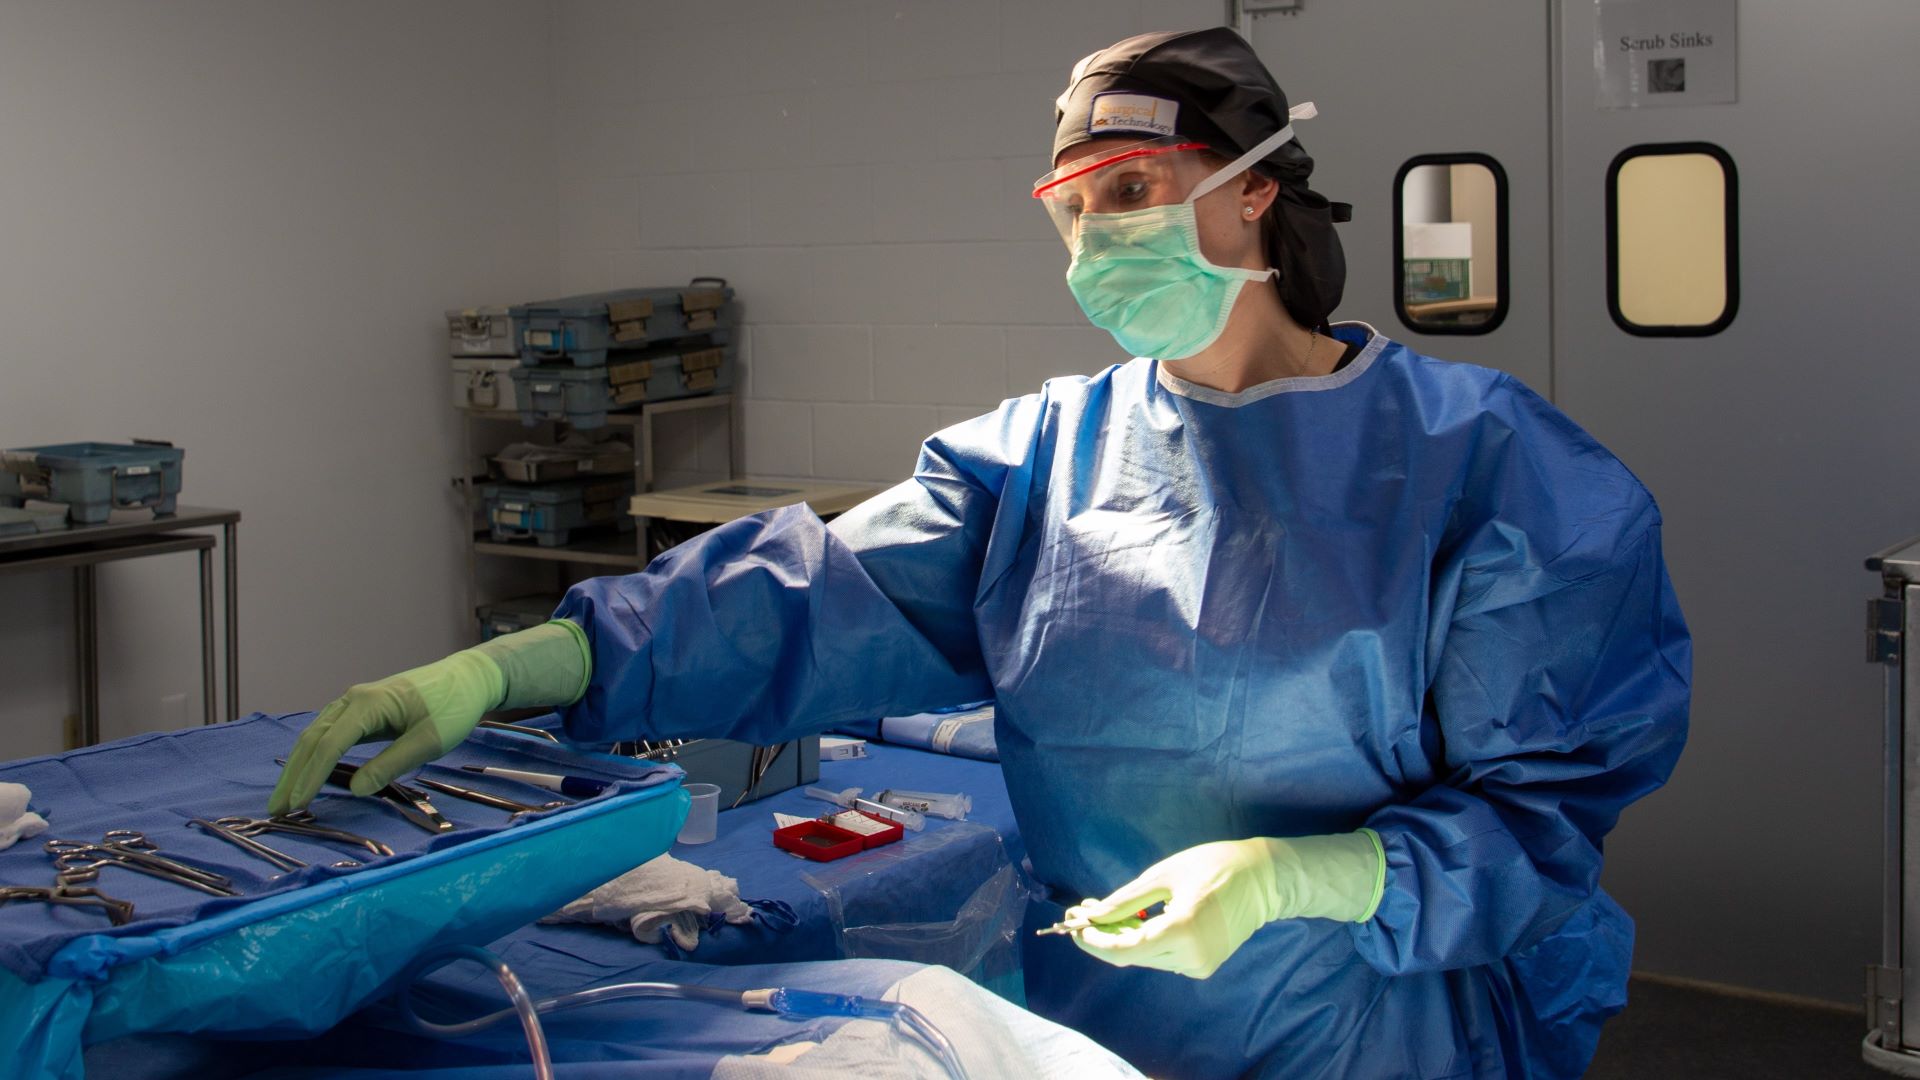 Figure in blue scrubs, green mask, gloves and protective eyewear reaches for surgical tools in community college lab where students are trained as surgical technicians.